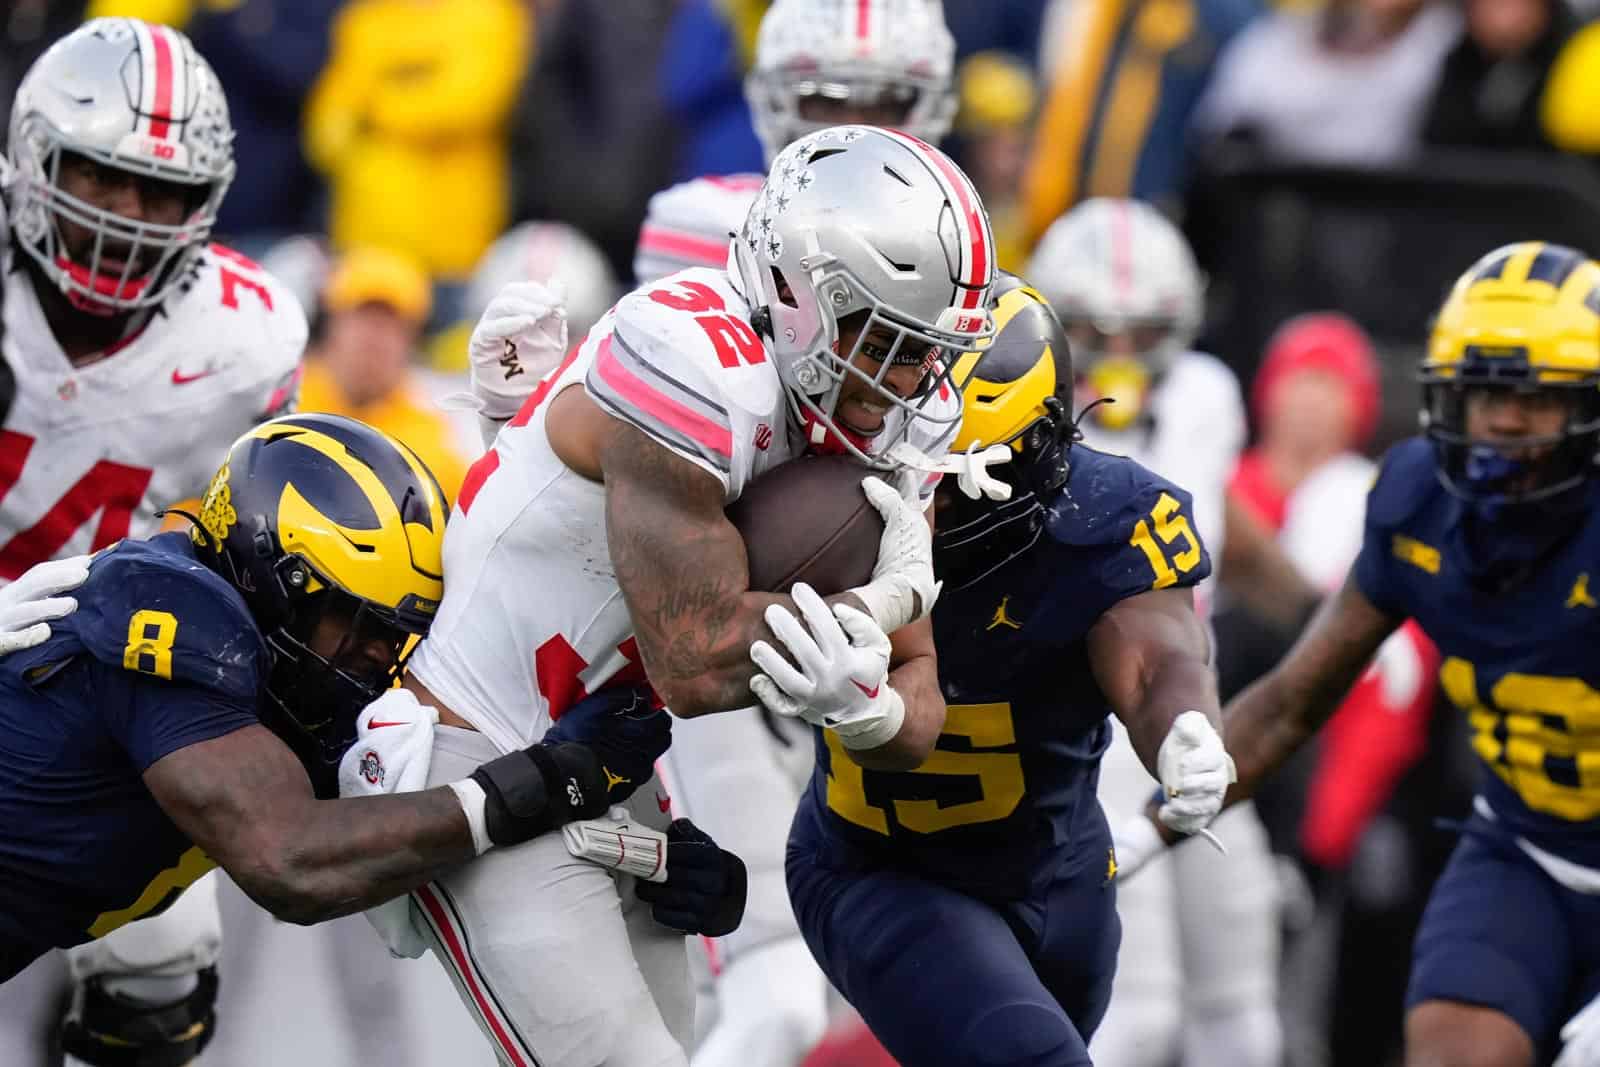 College football rankings: Michigan moves up to No. 2 in both polls